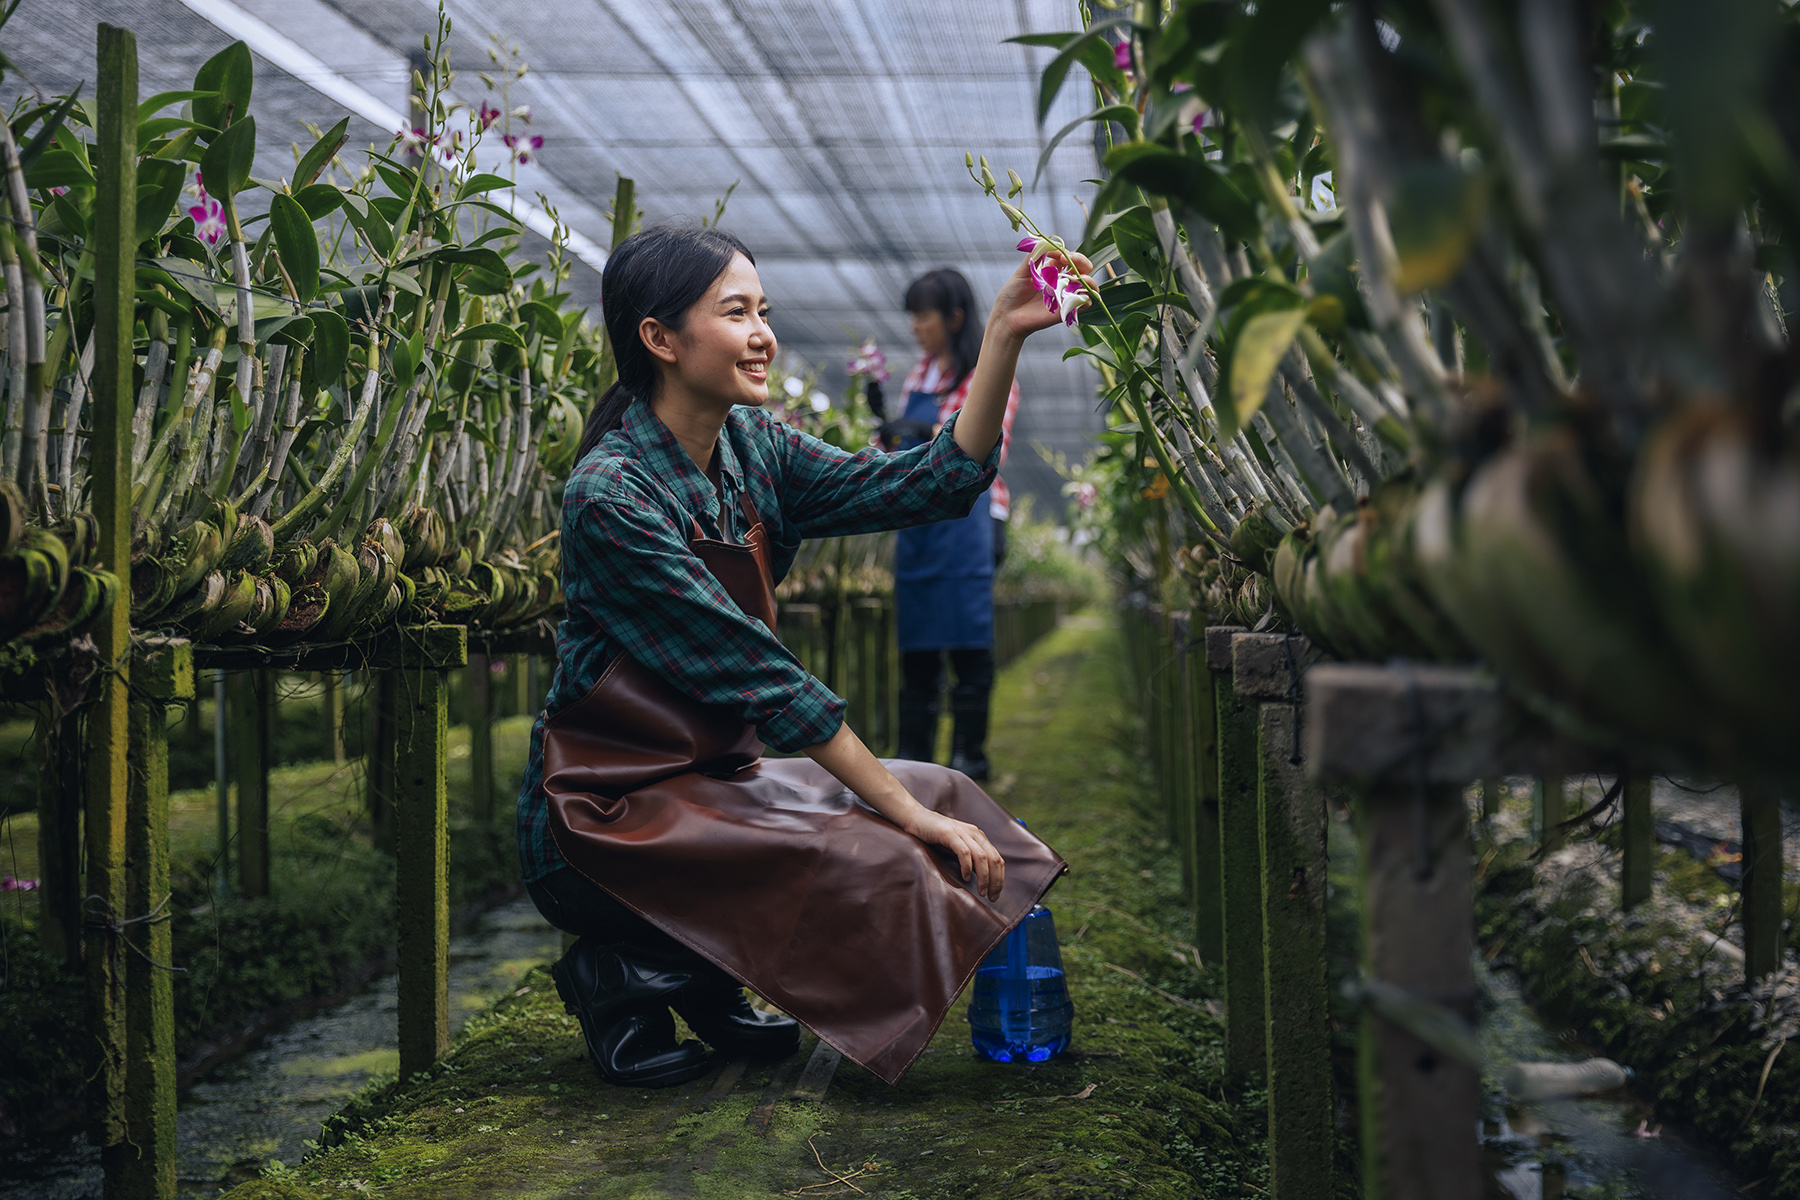 An agriculture student kneels on the ground in a greenhouse and inspects young orchid plants